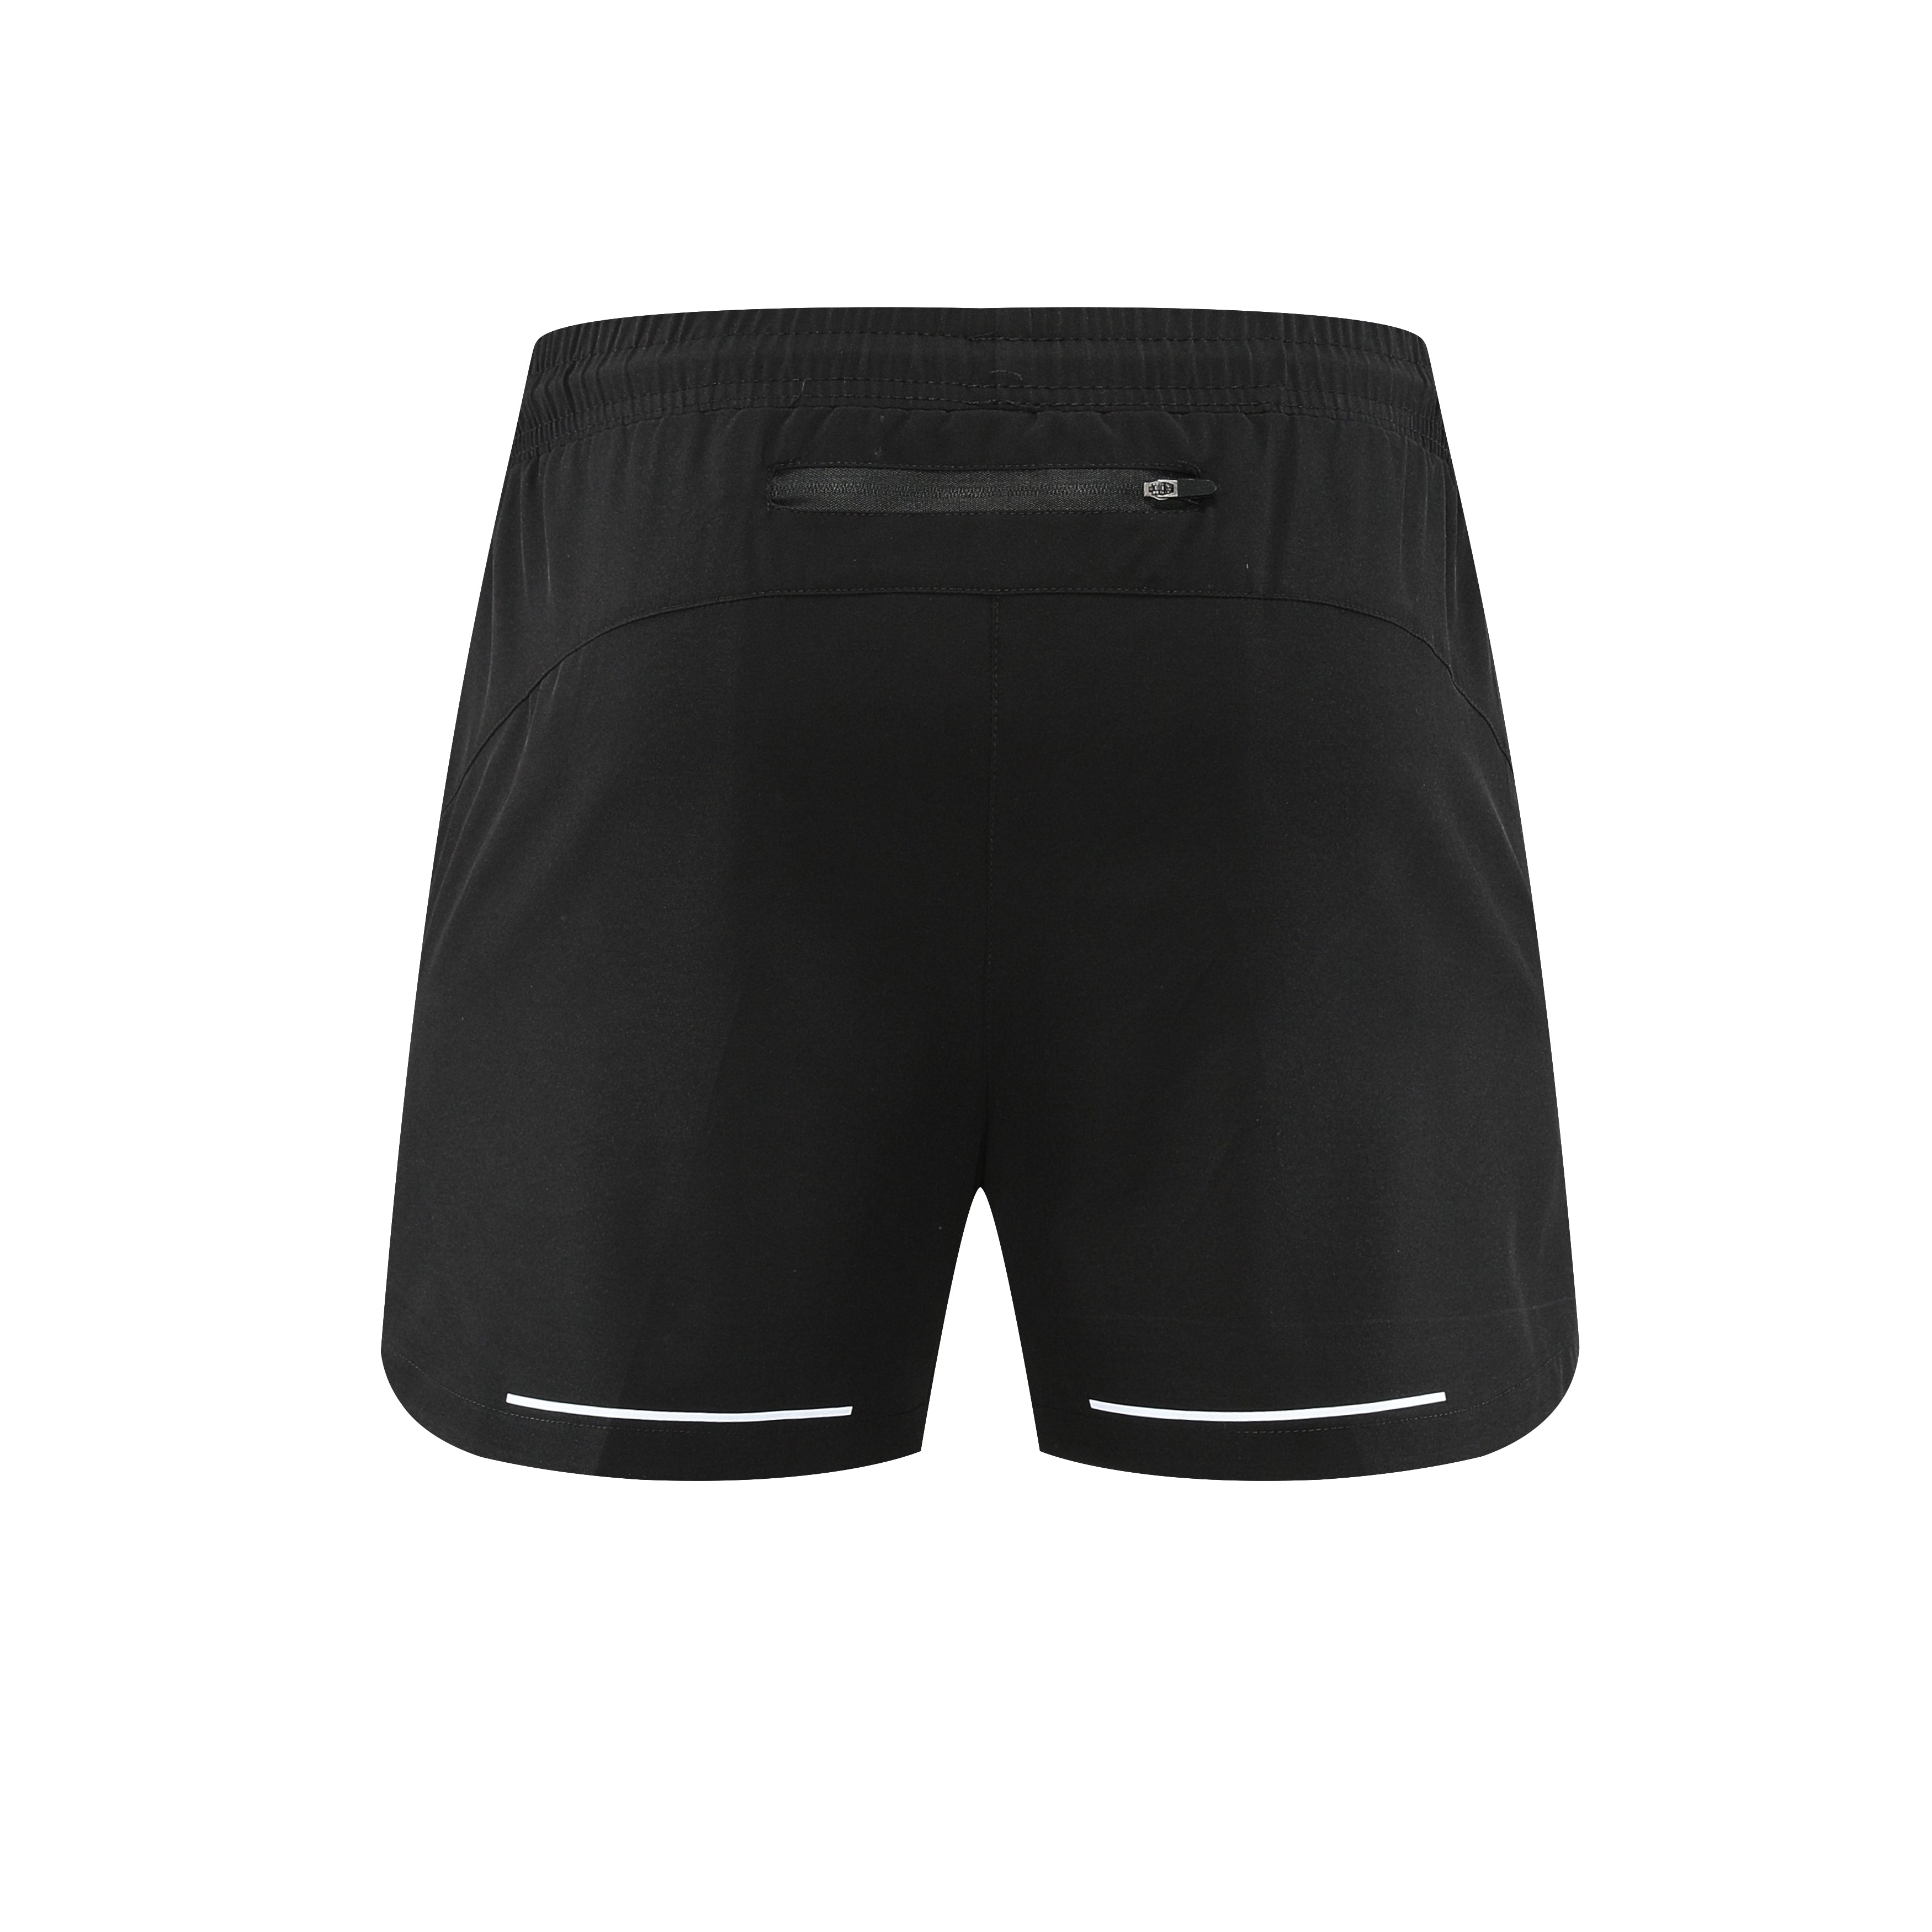 Electronic Spartan A Graphic Shorts